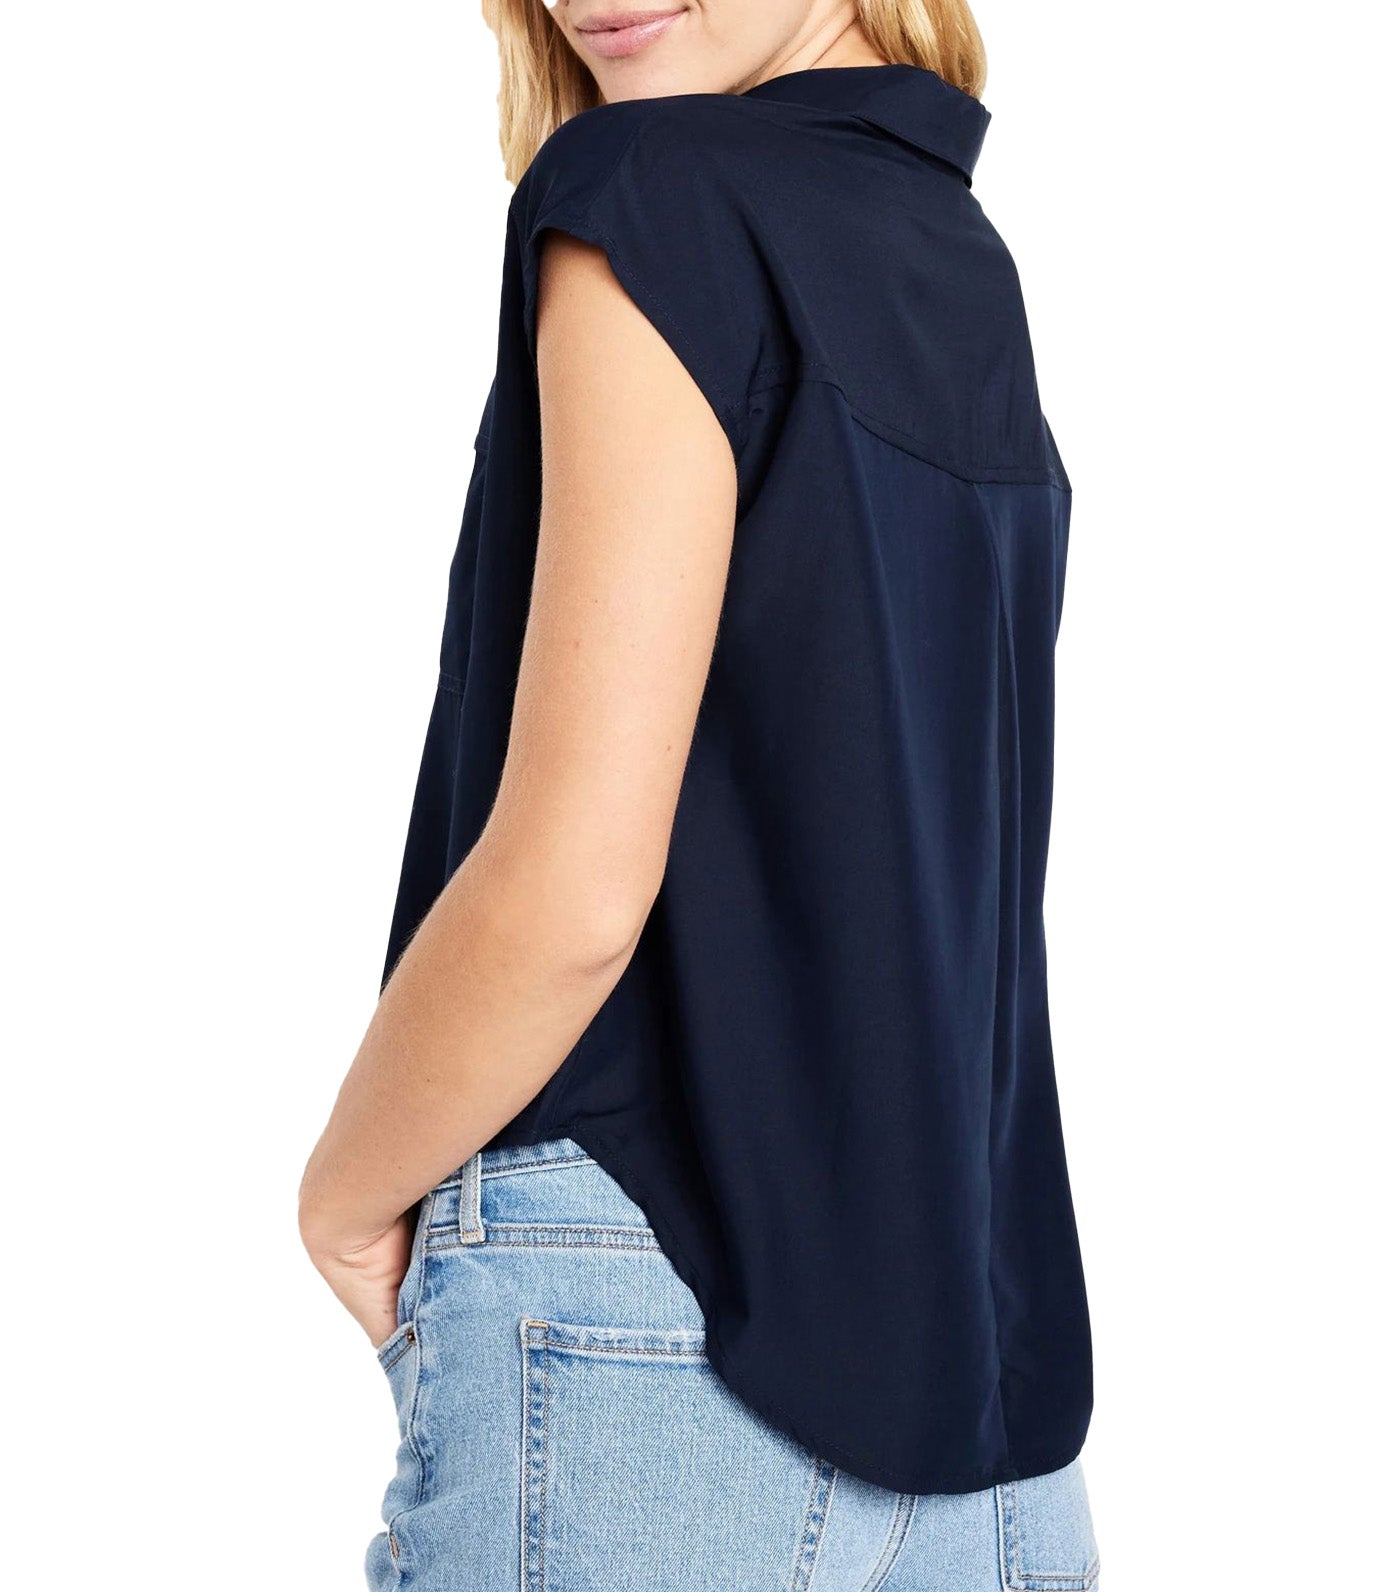 Dolman-Sleeve Utility Top for Women In The Navy